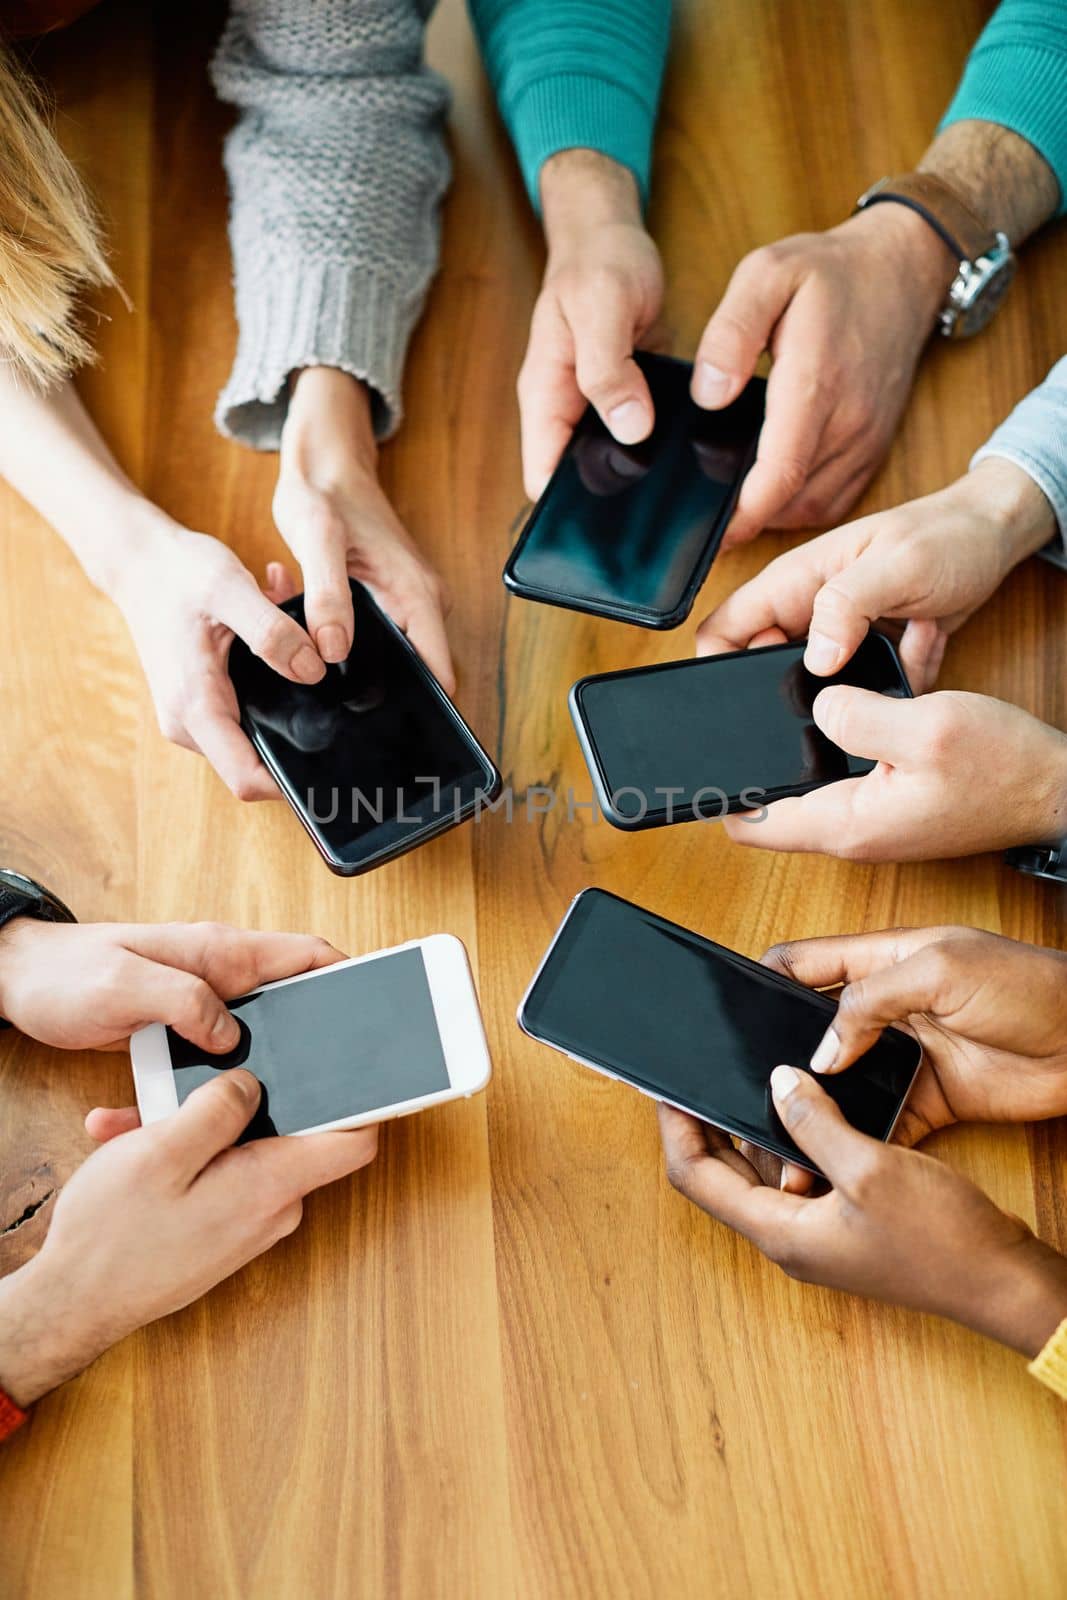 mobile phone group hand smartphone communication textin cell by Picsfive